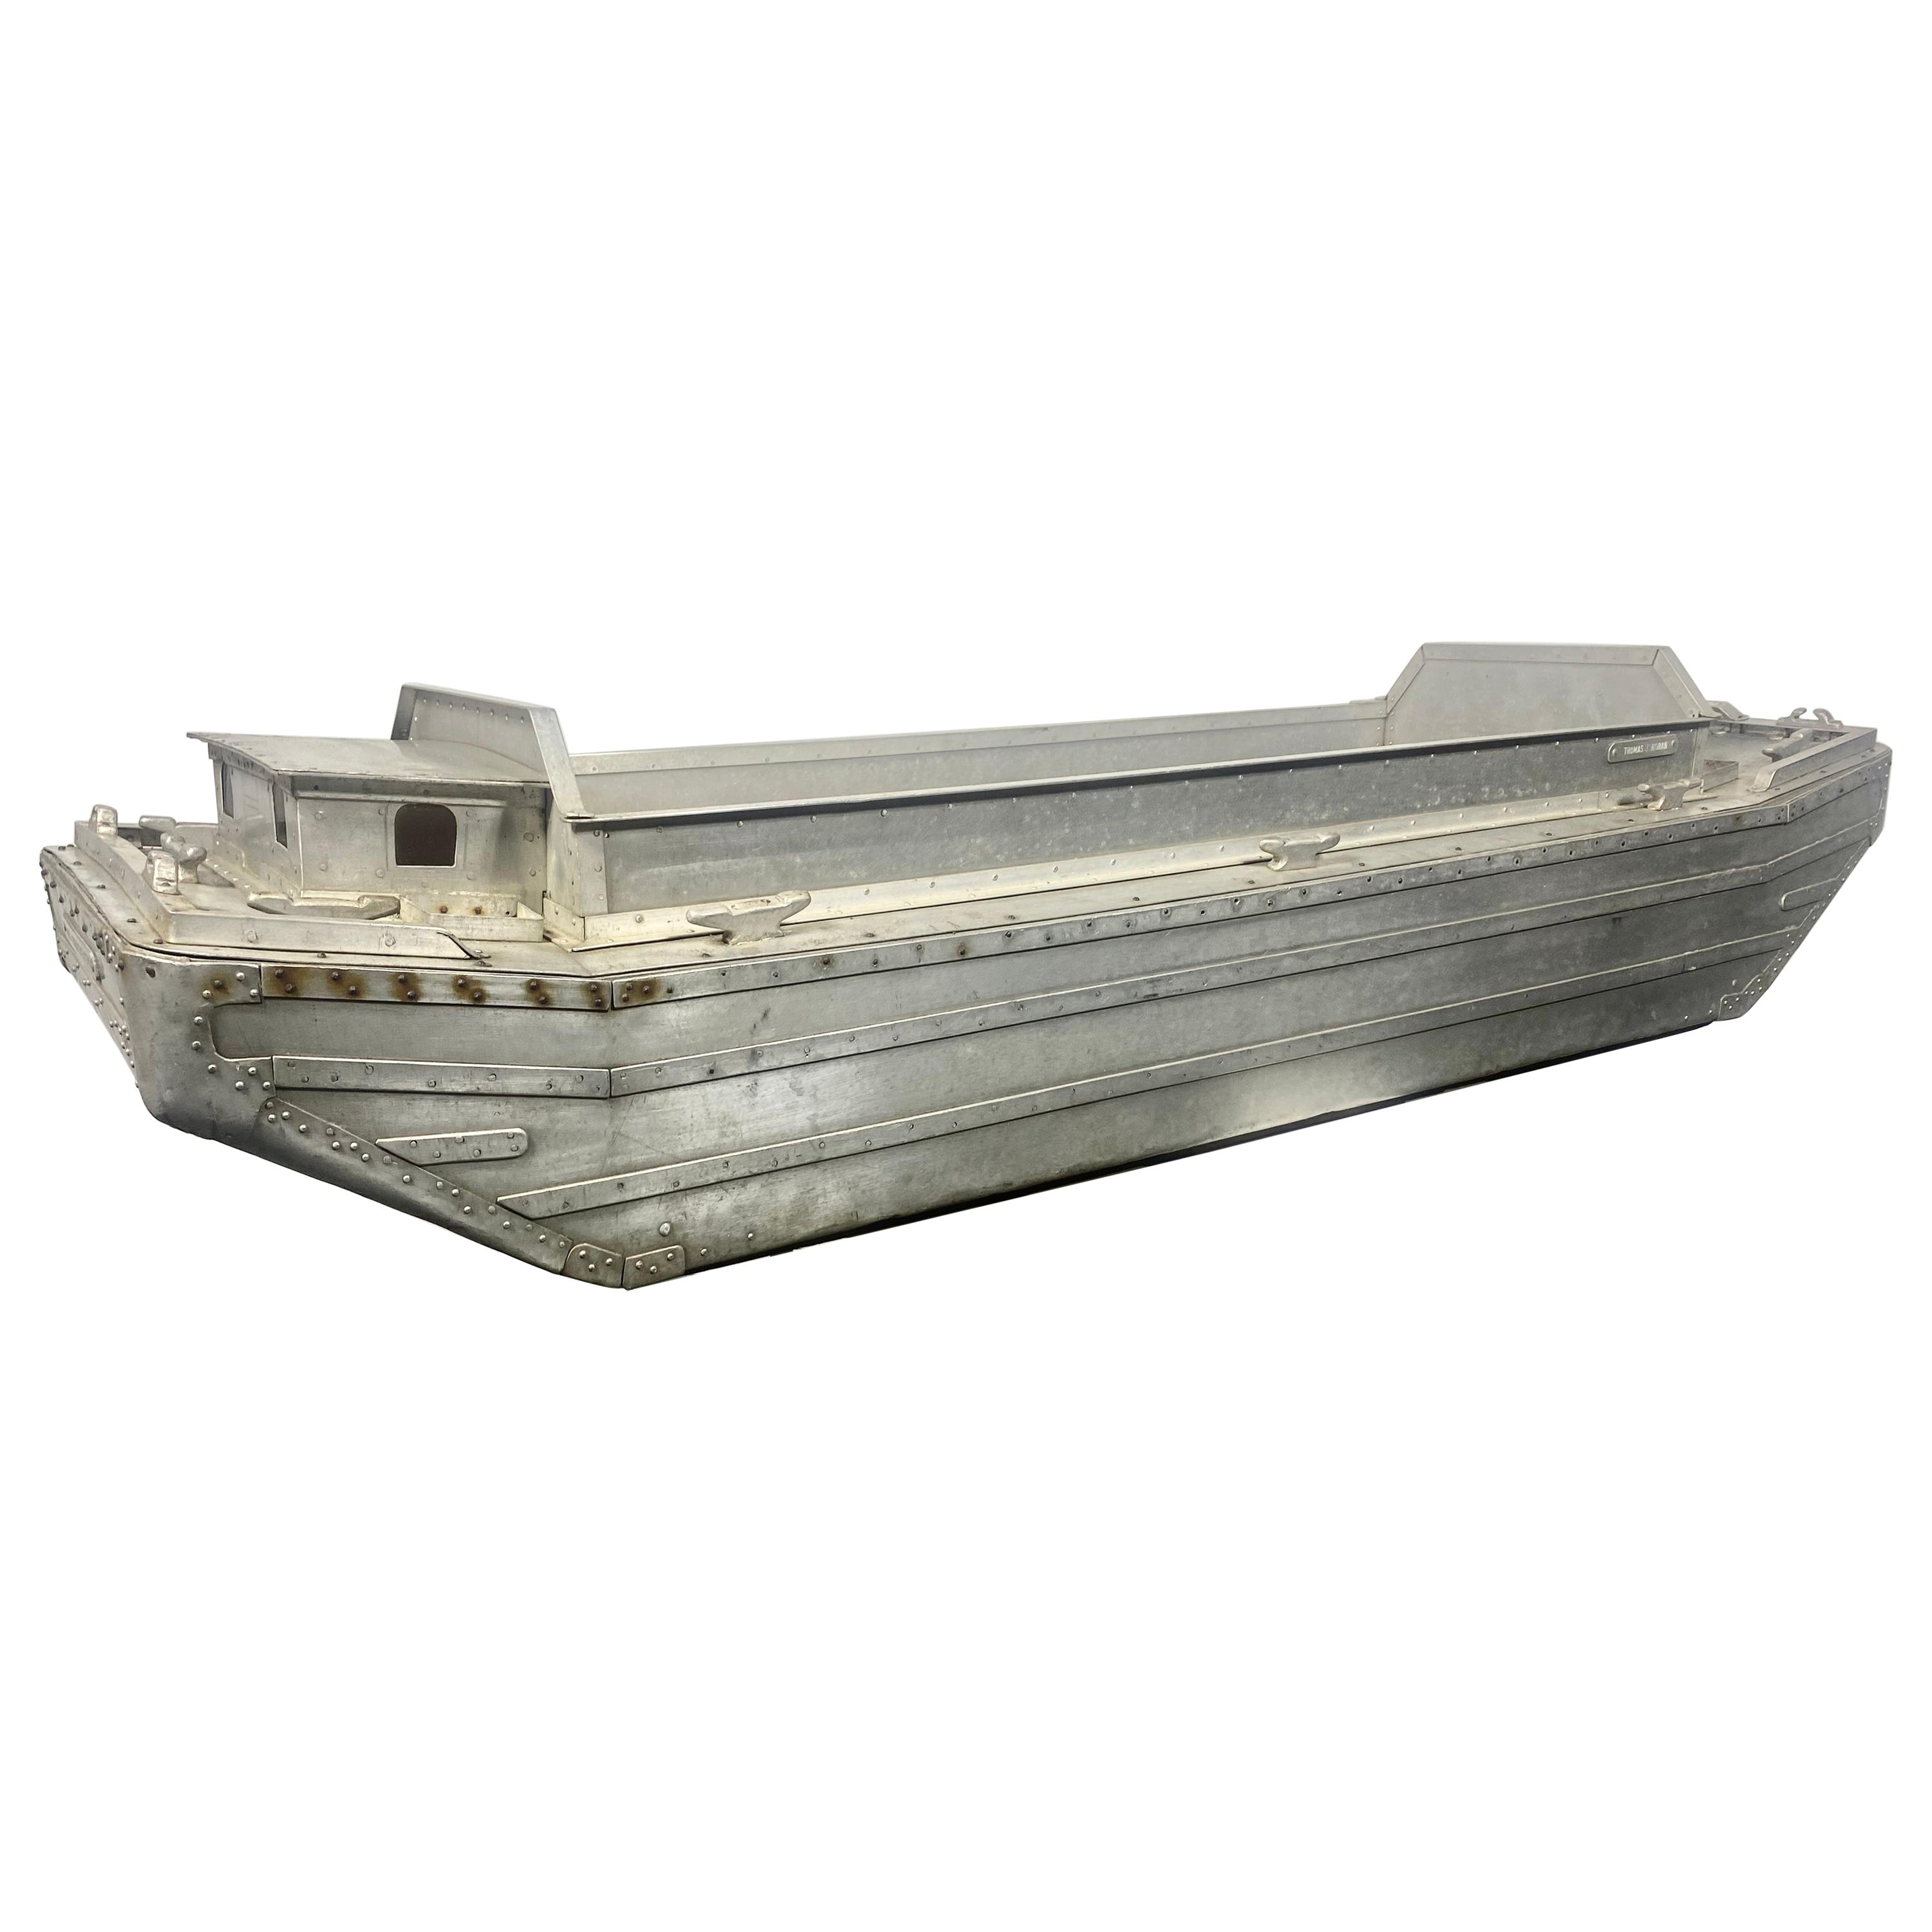 Large 48" Aluminum Hand Made Art Deco Barge (boat) signed Thomas Horan New York For Sale